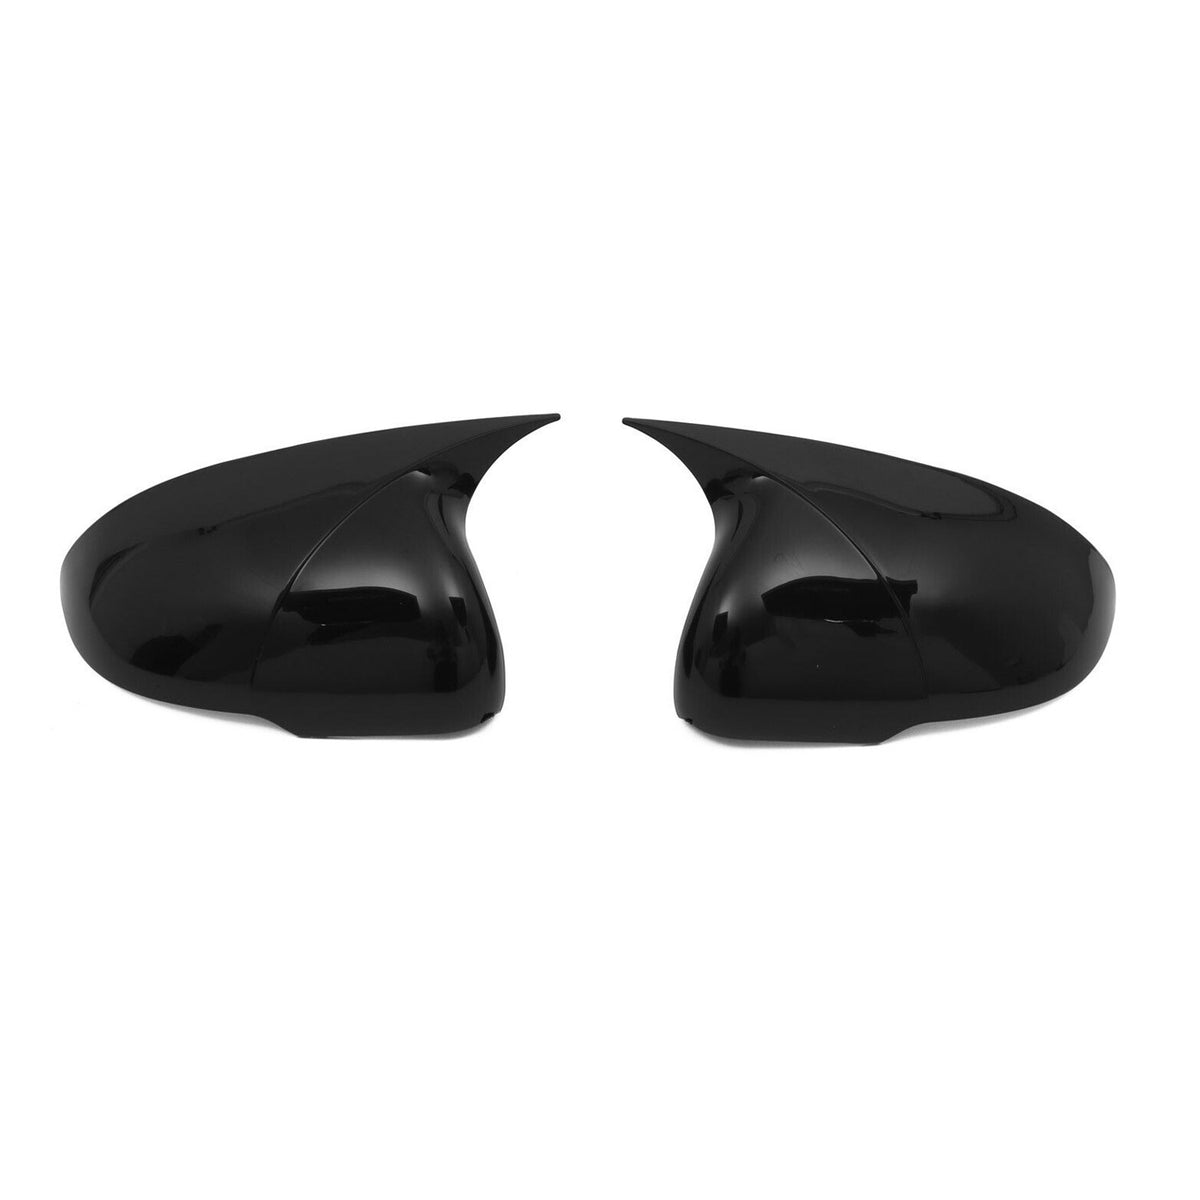 Mirror caps mirror cover for Kia Ceed 2012-2018 ABS black gloss 2 pieces